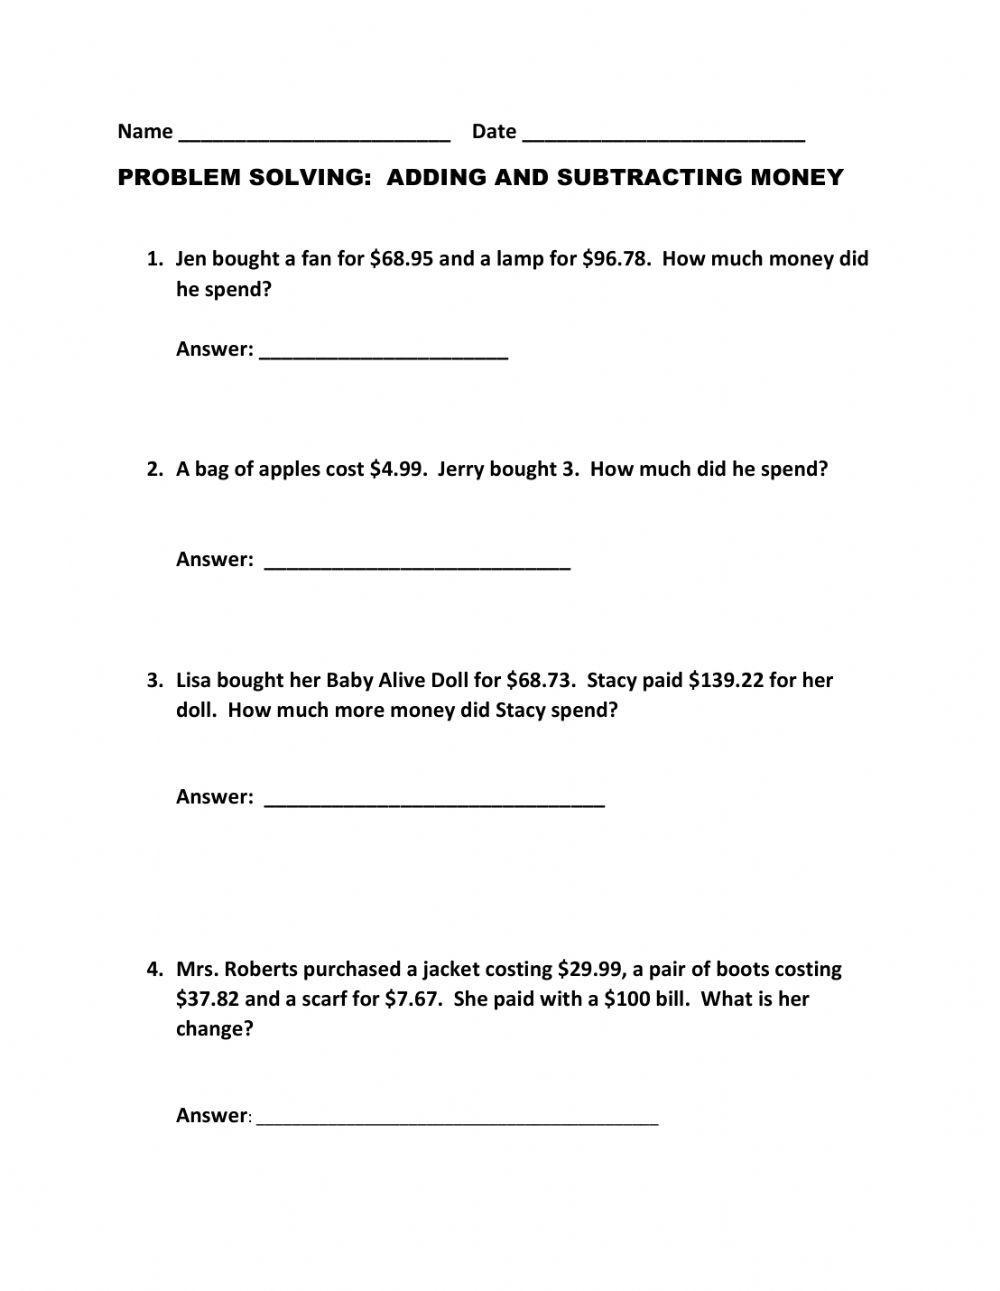 Problem Solving:Adding and Subtracting Money